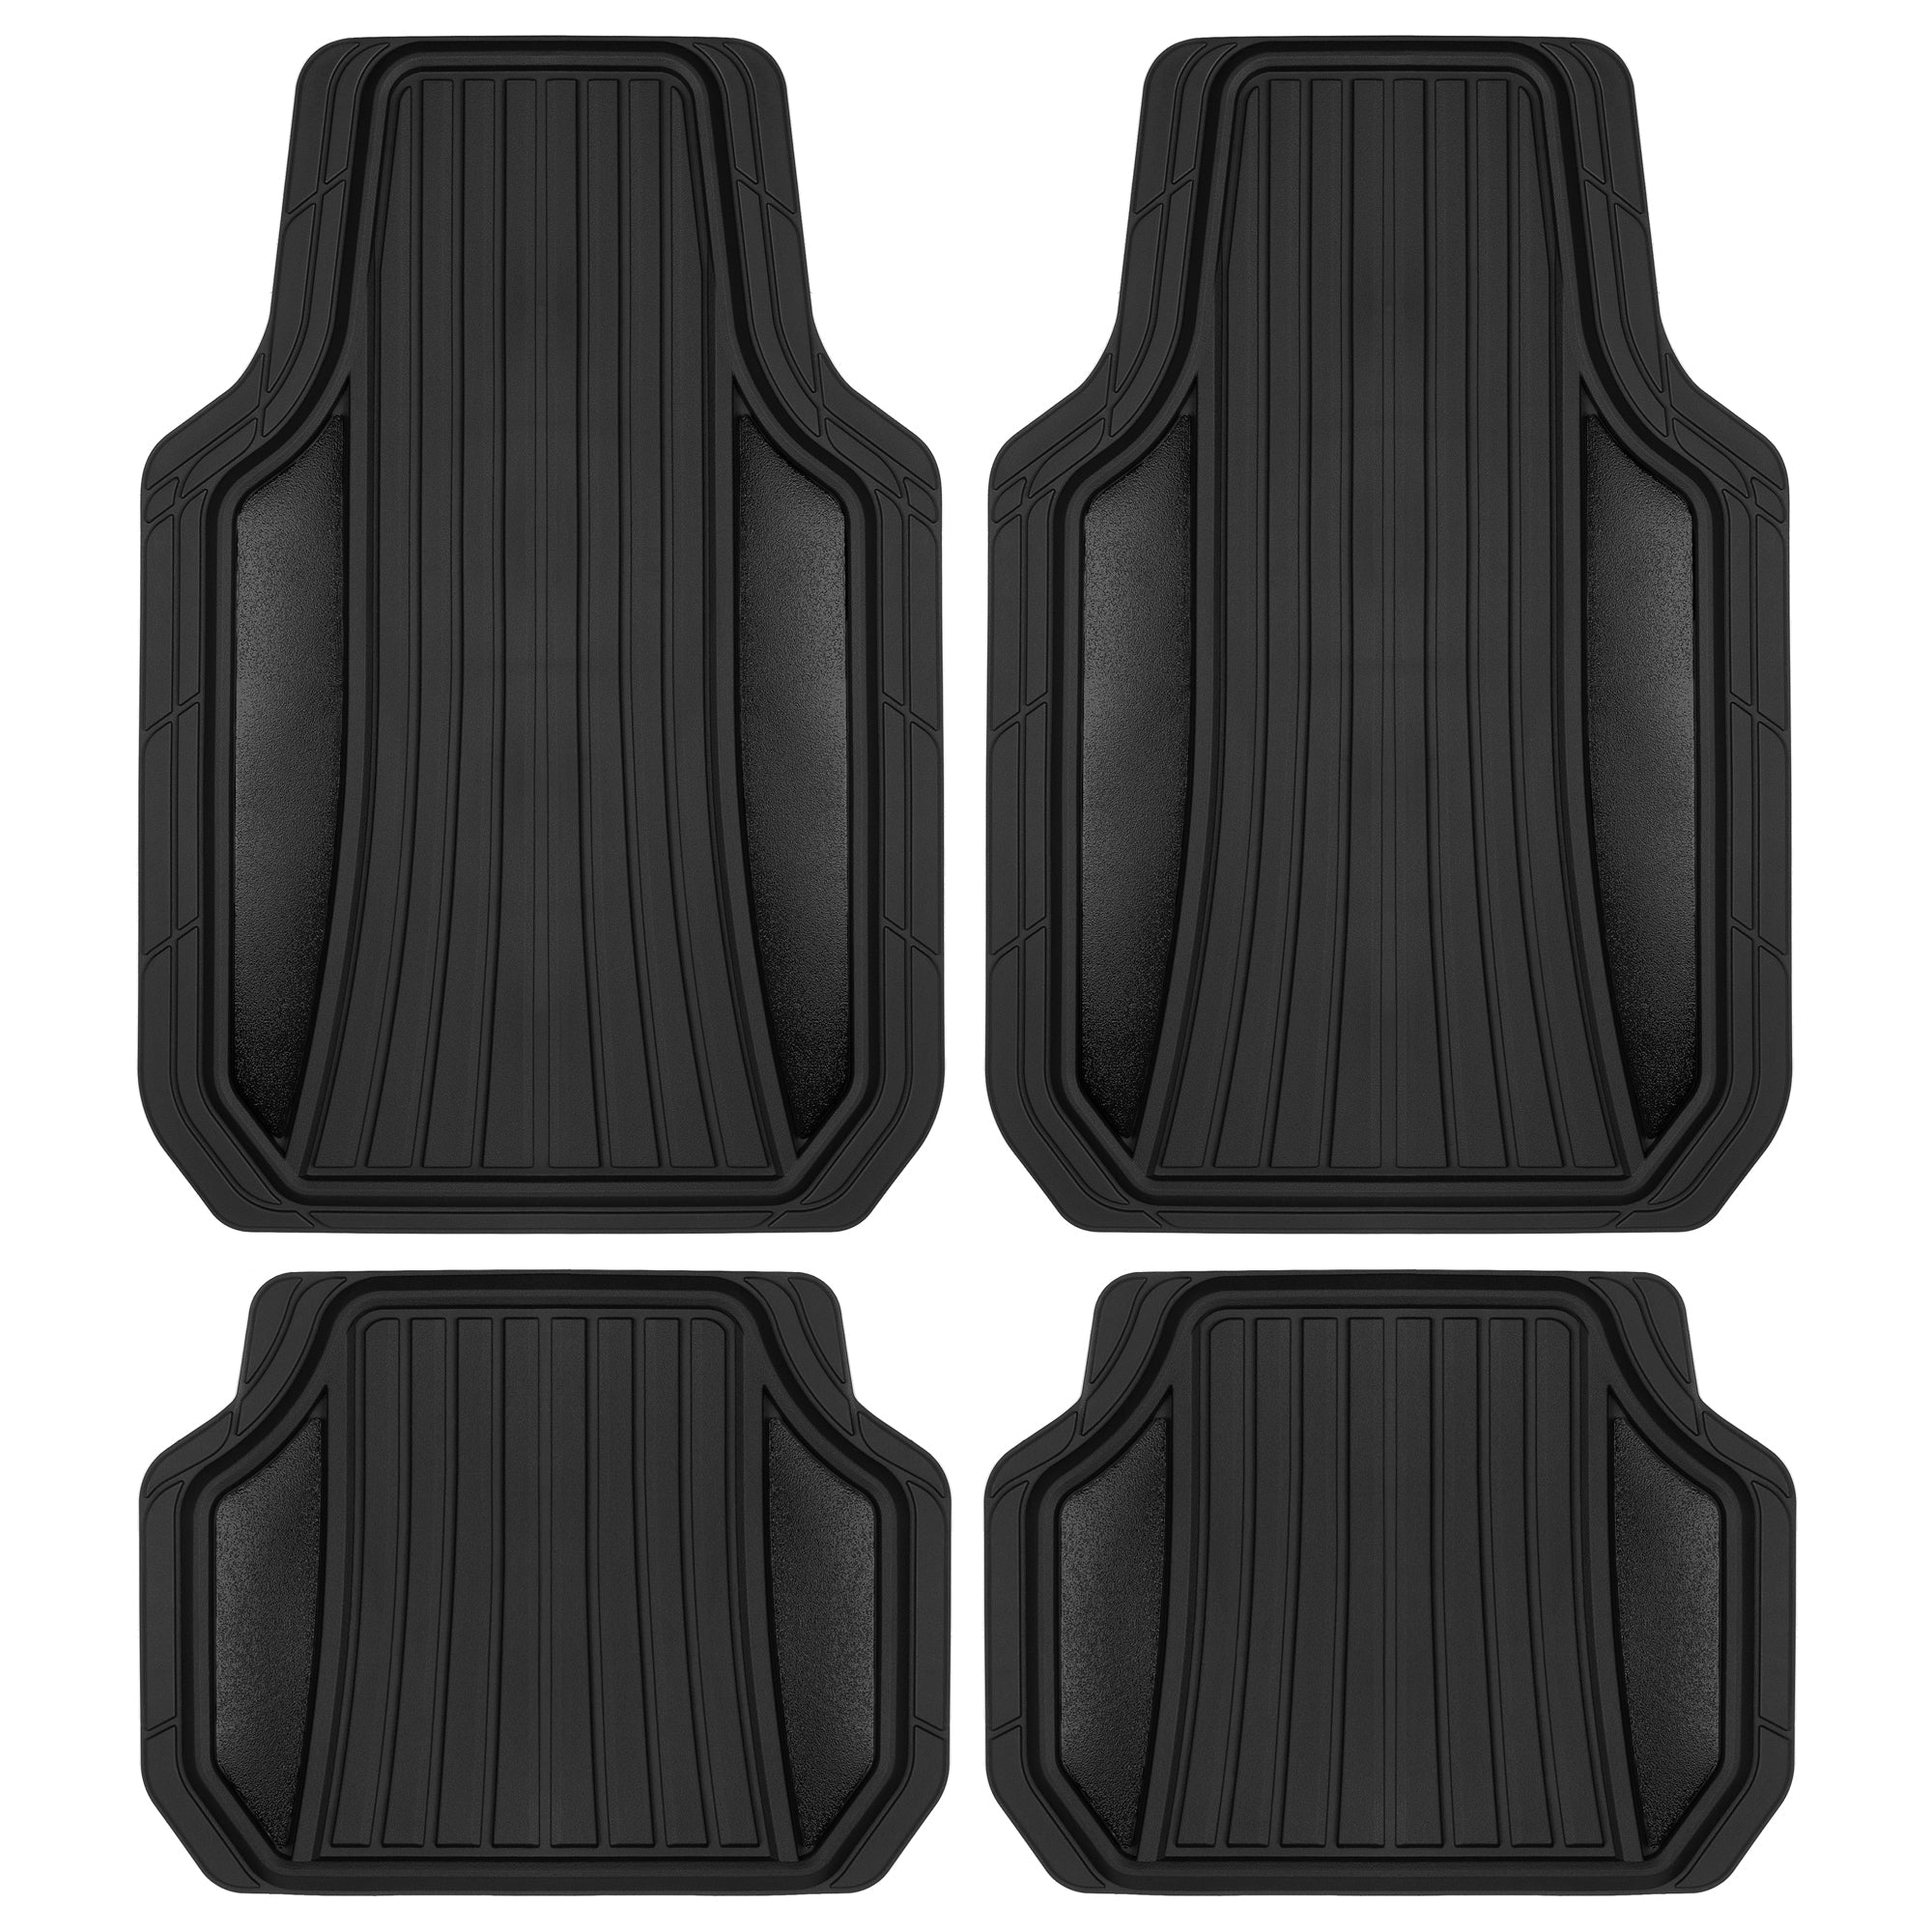 Motor Trend Two Tone Shield Black and Gloss Black Car Floor Mats - Durable Rubber Mats for Enhanced Interior Protection - Black/Gloss Black